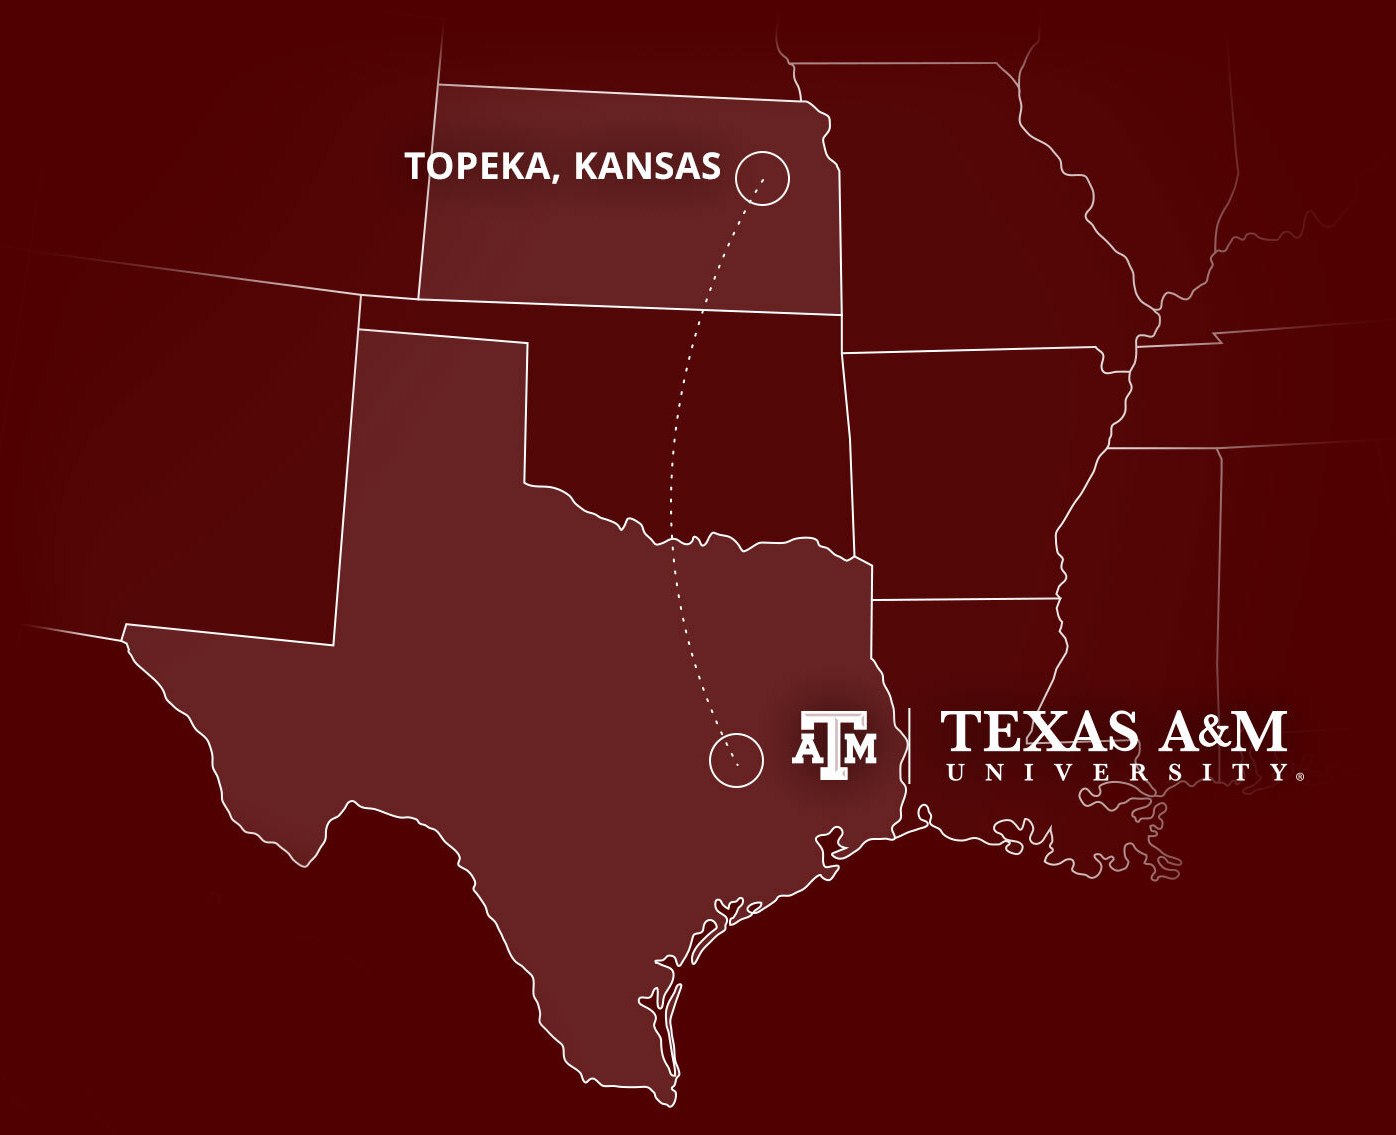 Map showing connection from Texas A&M to Topeka